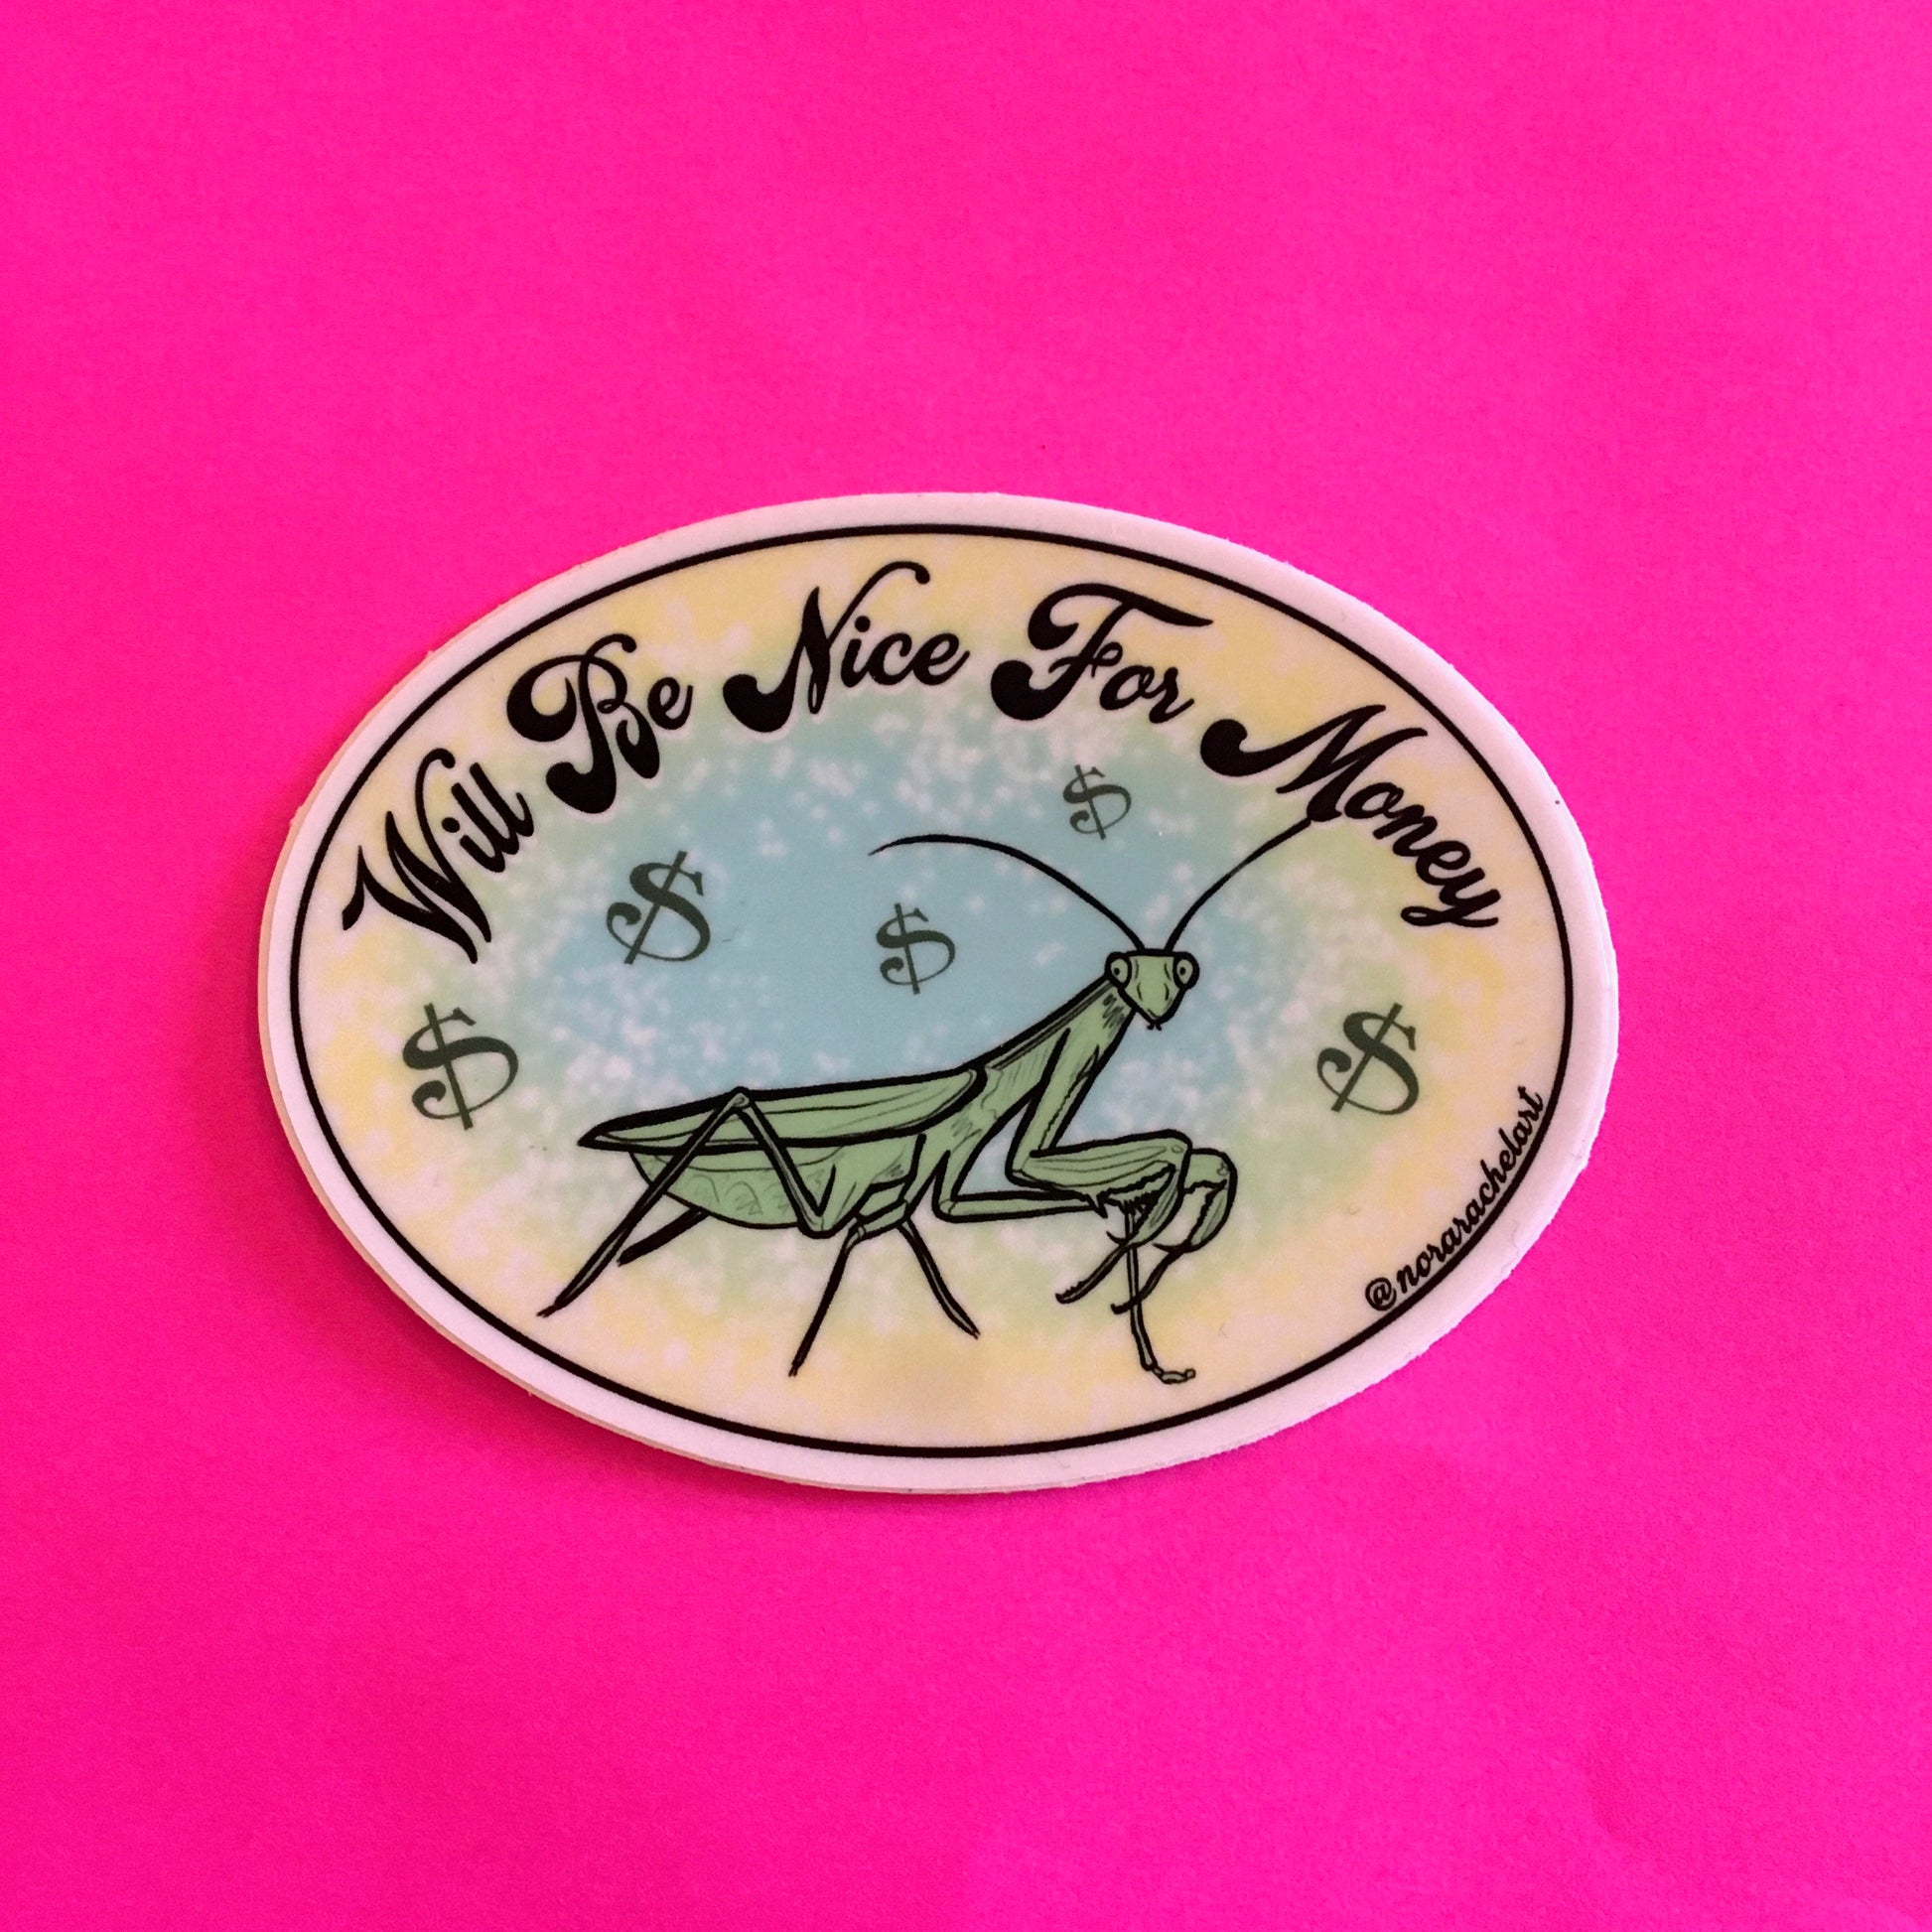 Will Be Nice For Money Sticker